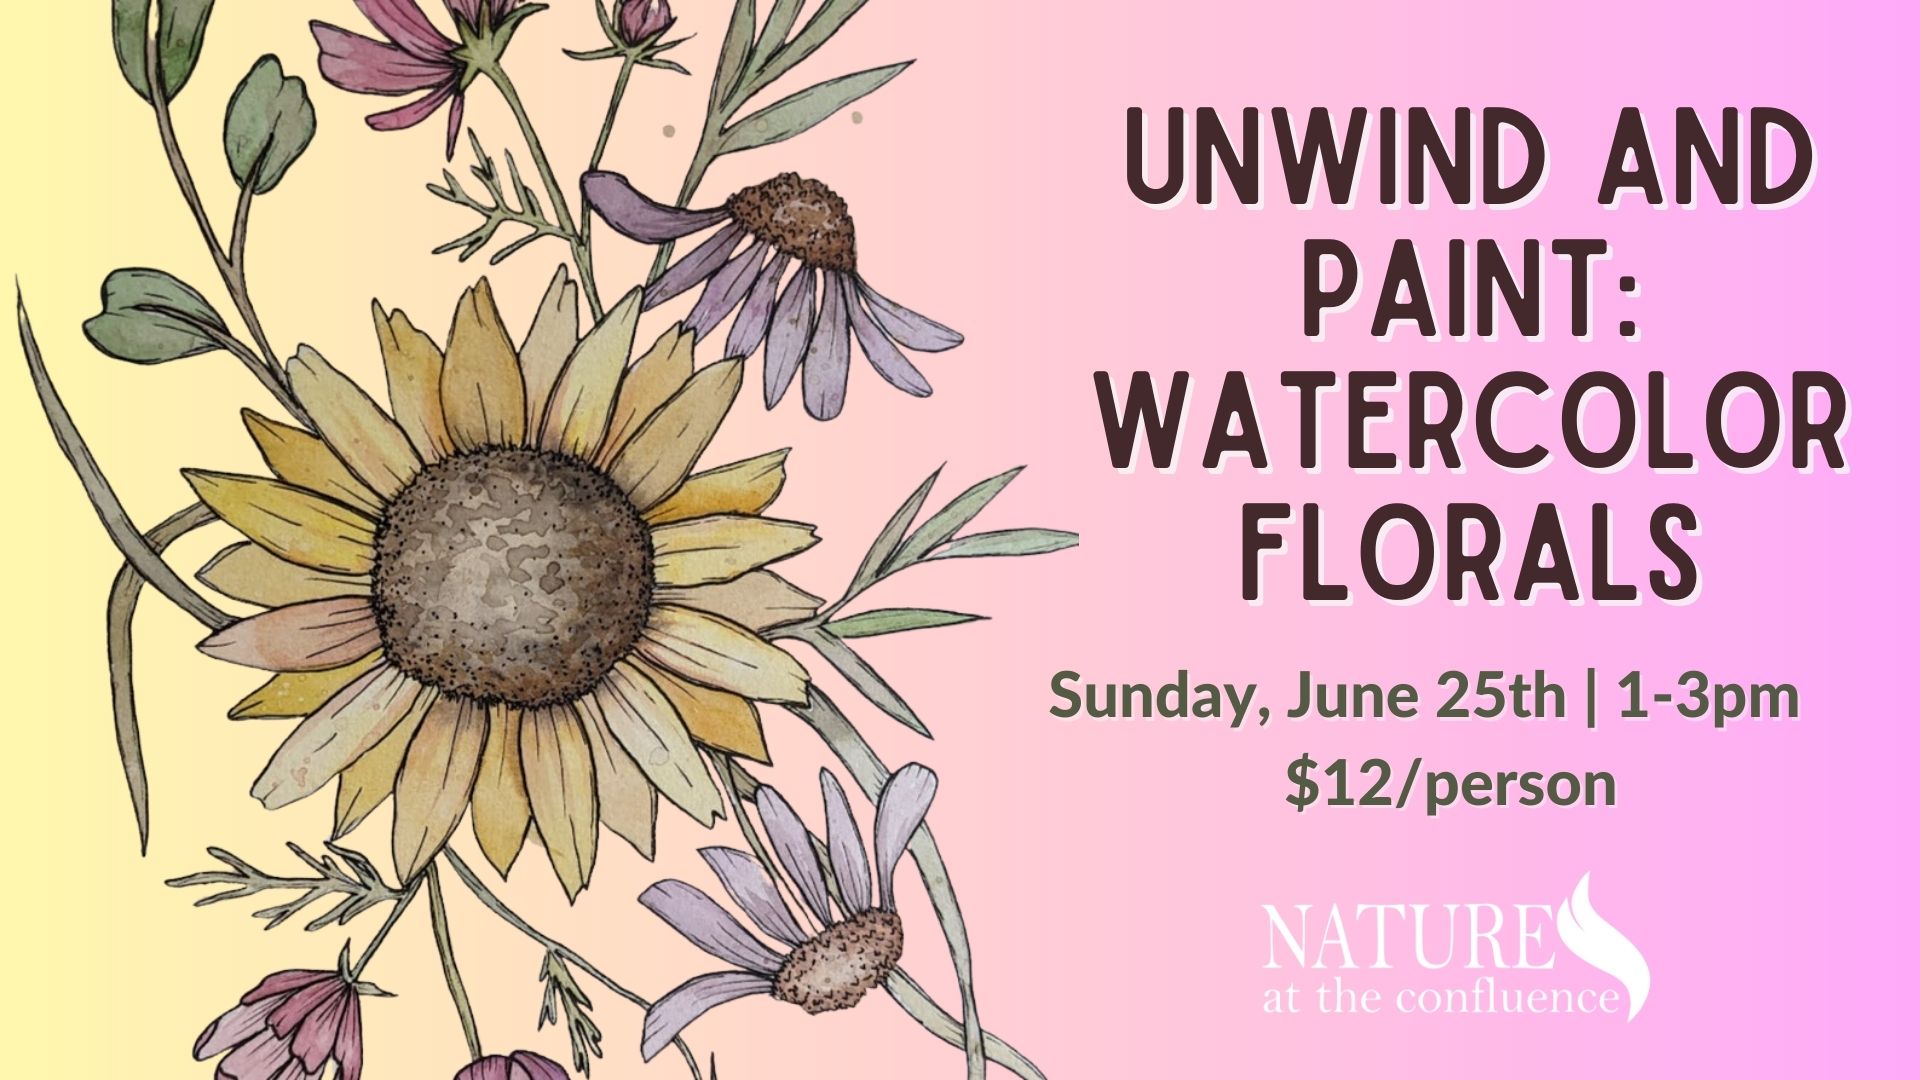 Unwind and Paint: Watercolor Florals